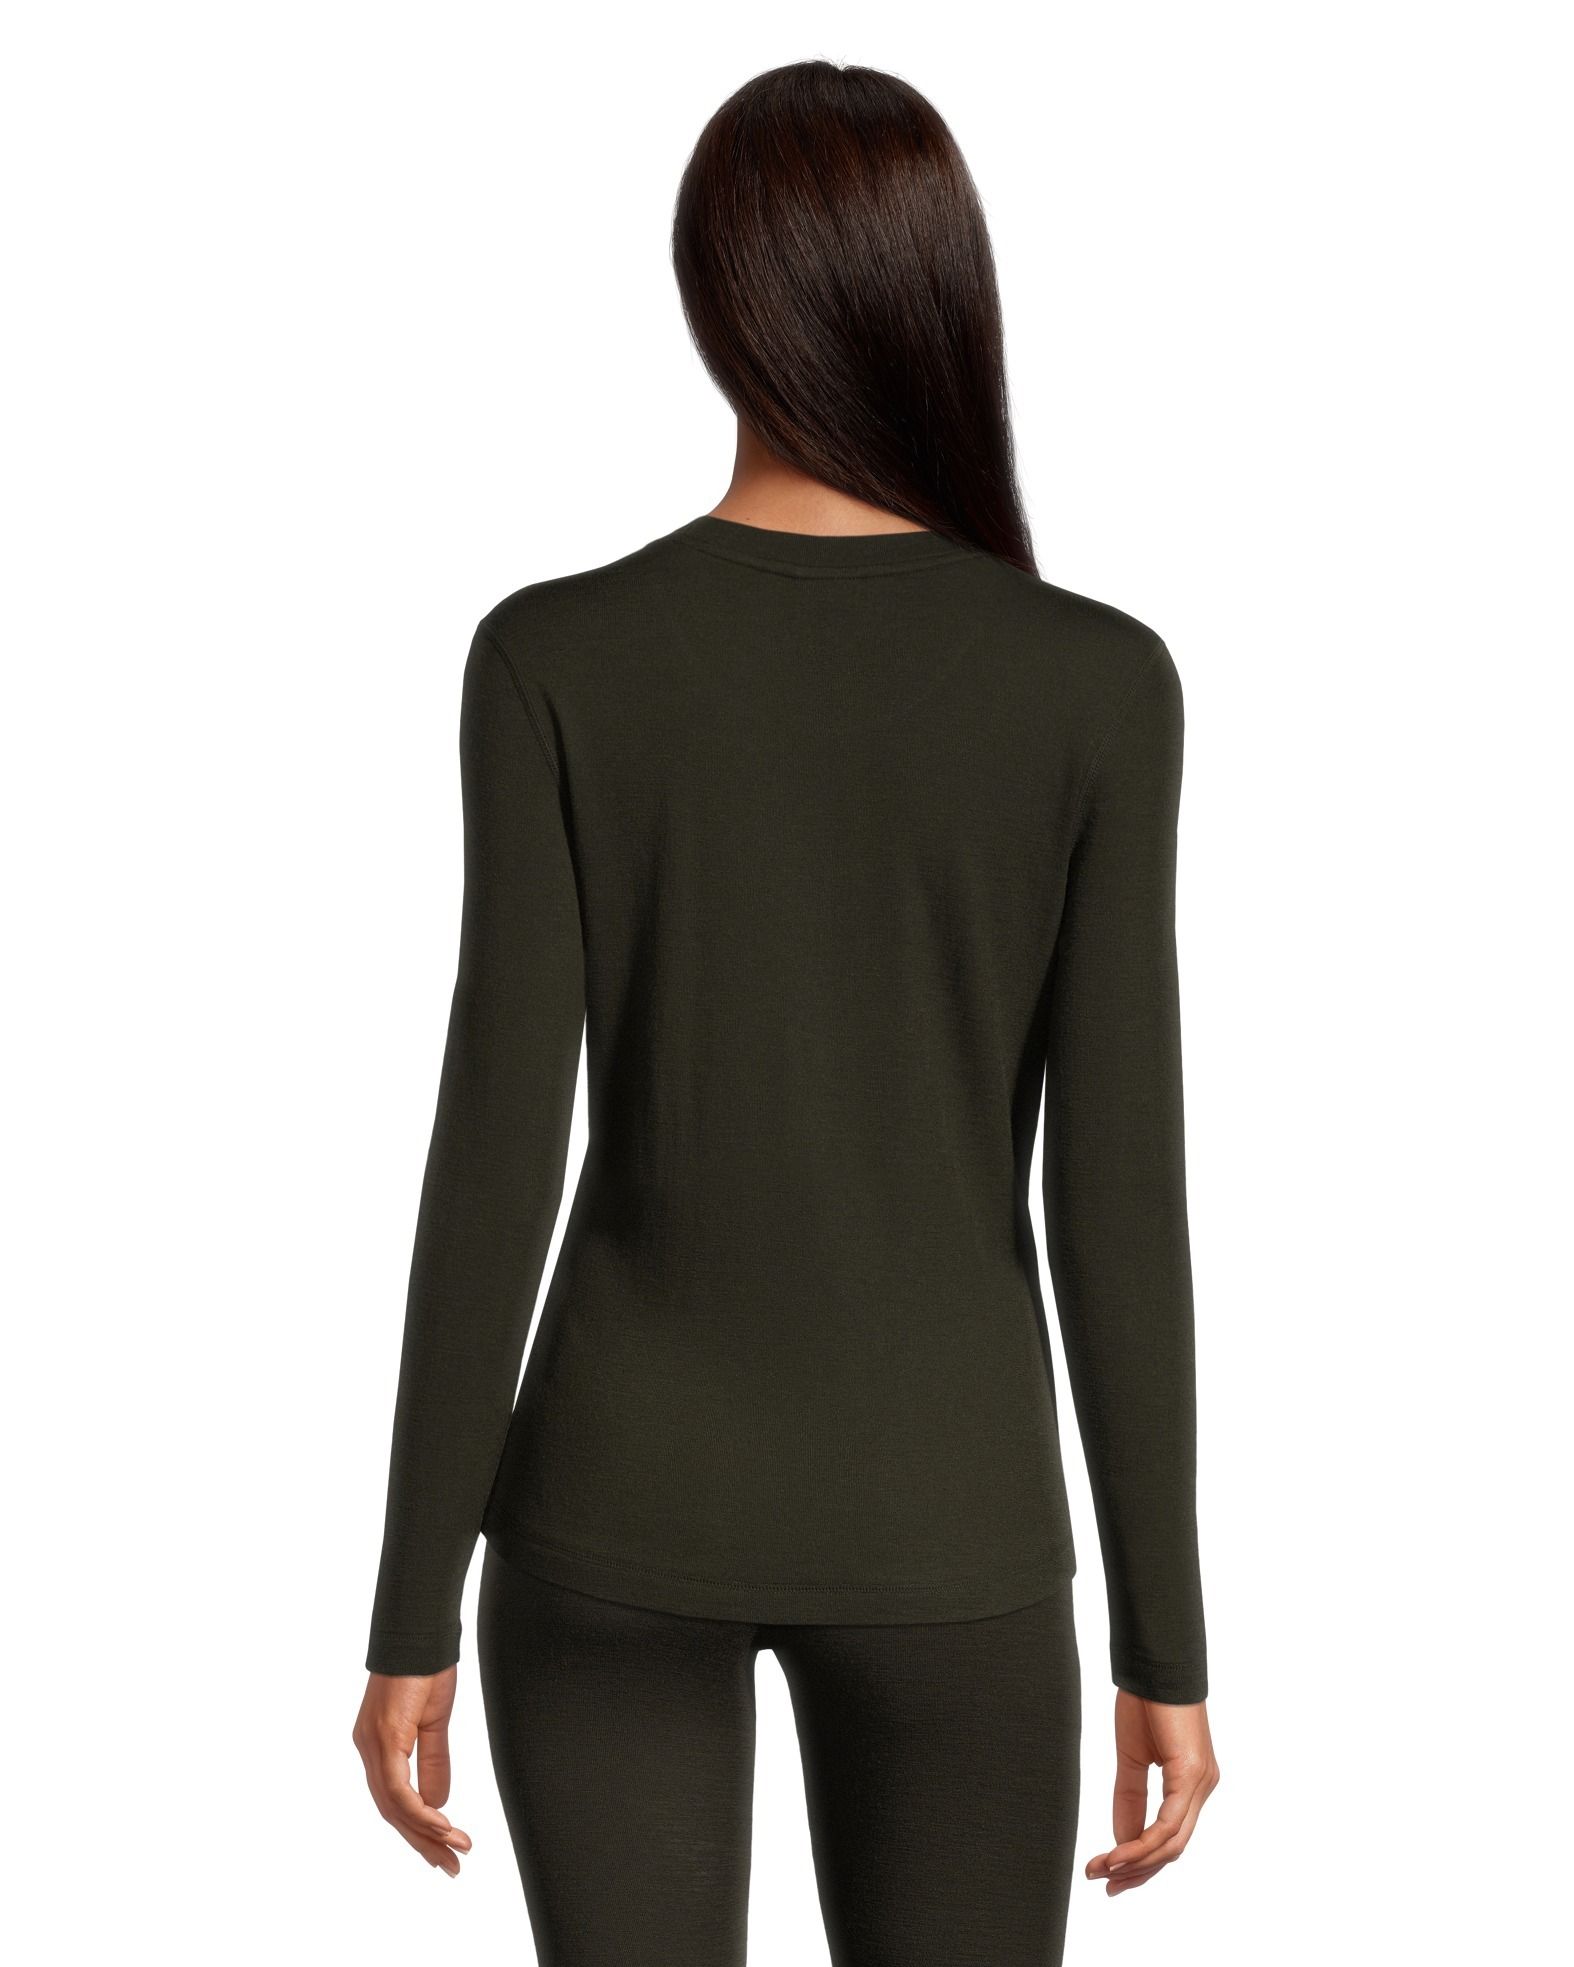 https://media-www.marks.com/product/marks-work-wearhouse/ladies-world/ladies-accessories/410033173013/windriver-women-s-merino-wool-thermal-top-59e0af6b-8c2e-4beb-8b59-2656b2d54df9-jpgrendition.jpg?imdensity=1&imwidth=1244&impolicy=mZoom